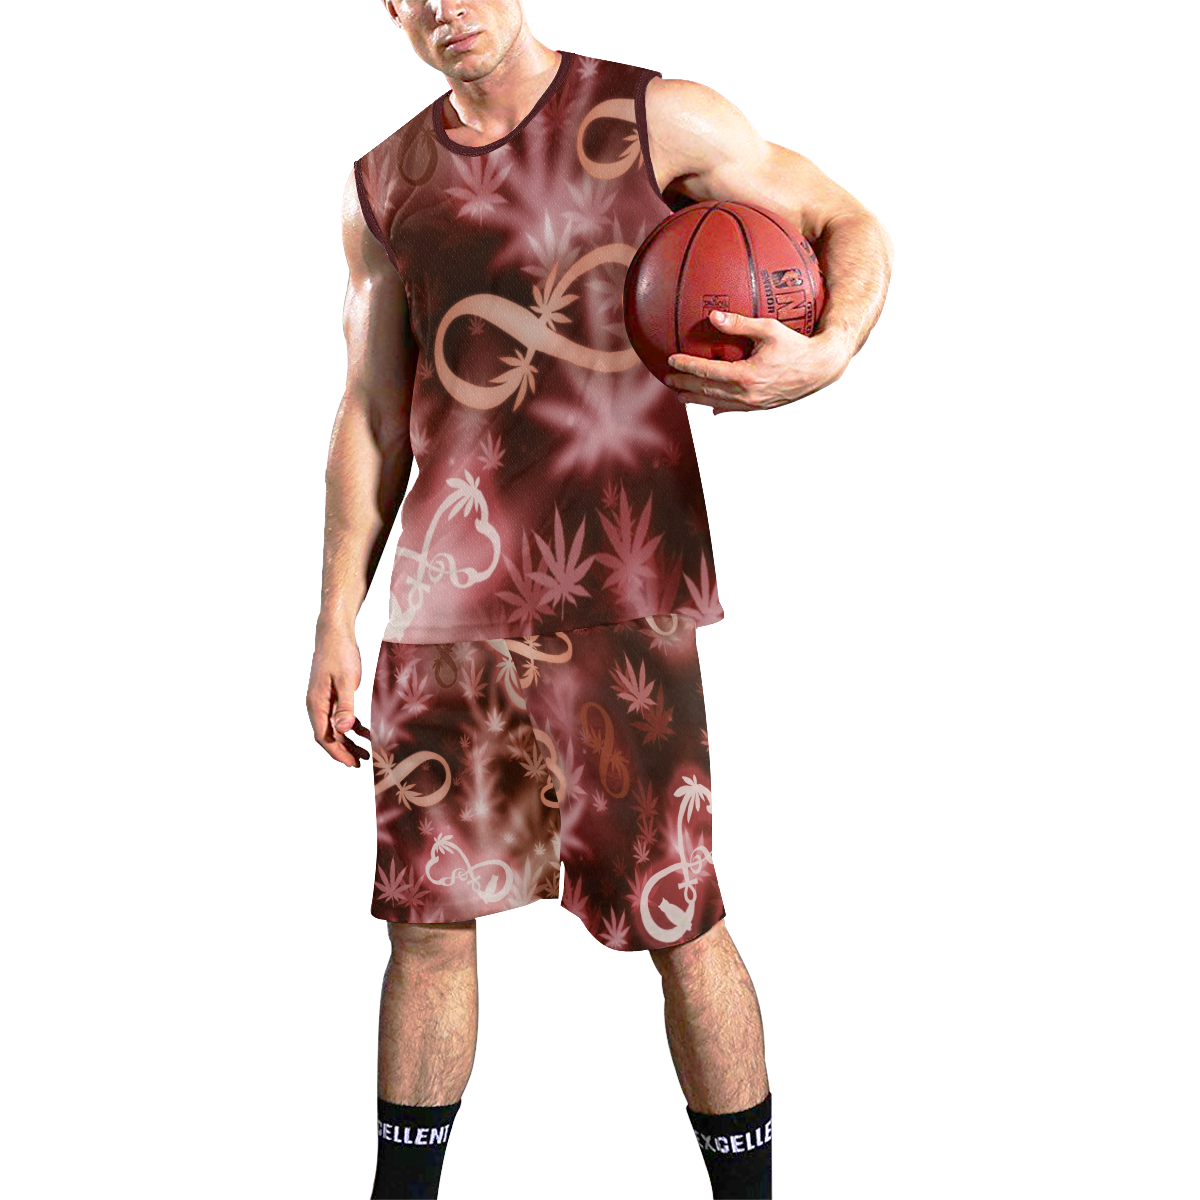 INFINITY RED COSMOS All Over Print Basketball Uniform